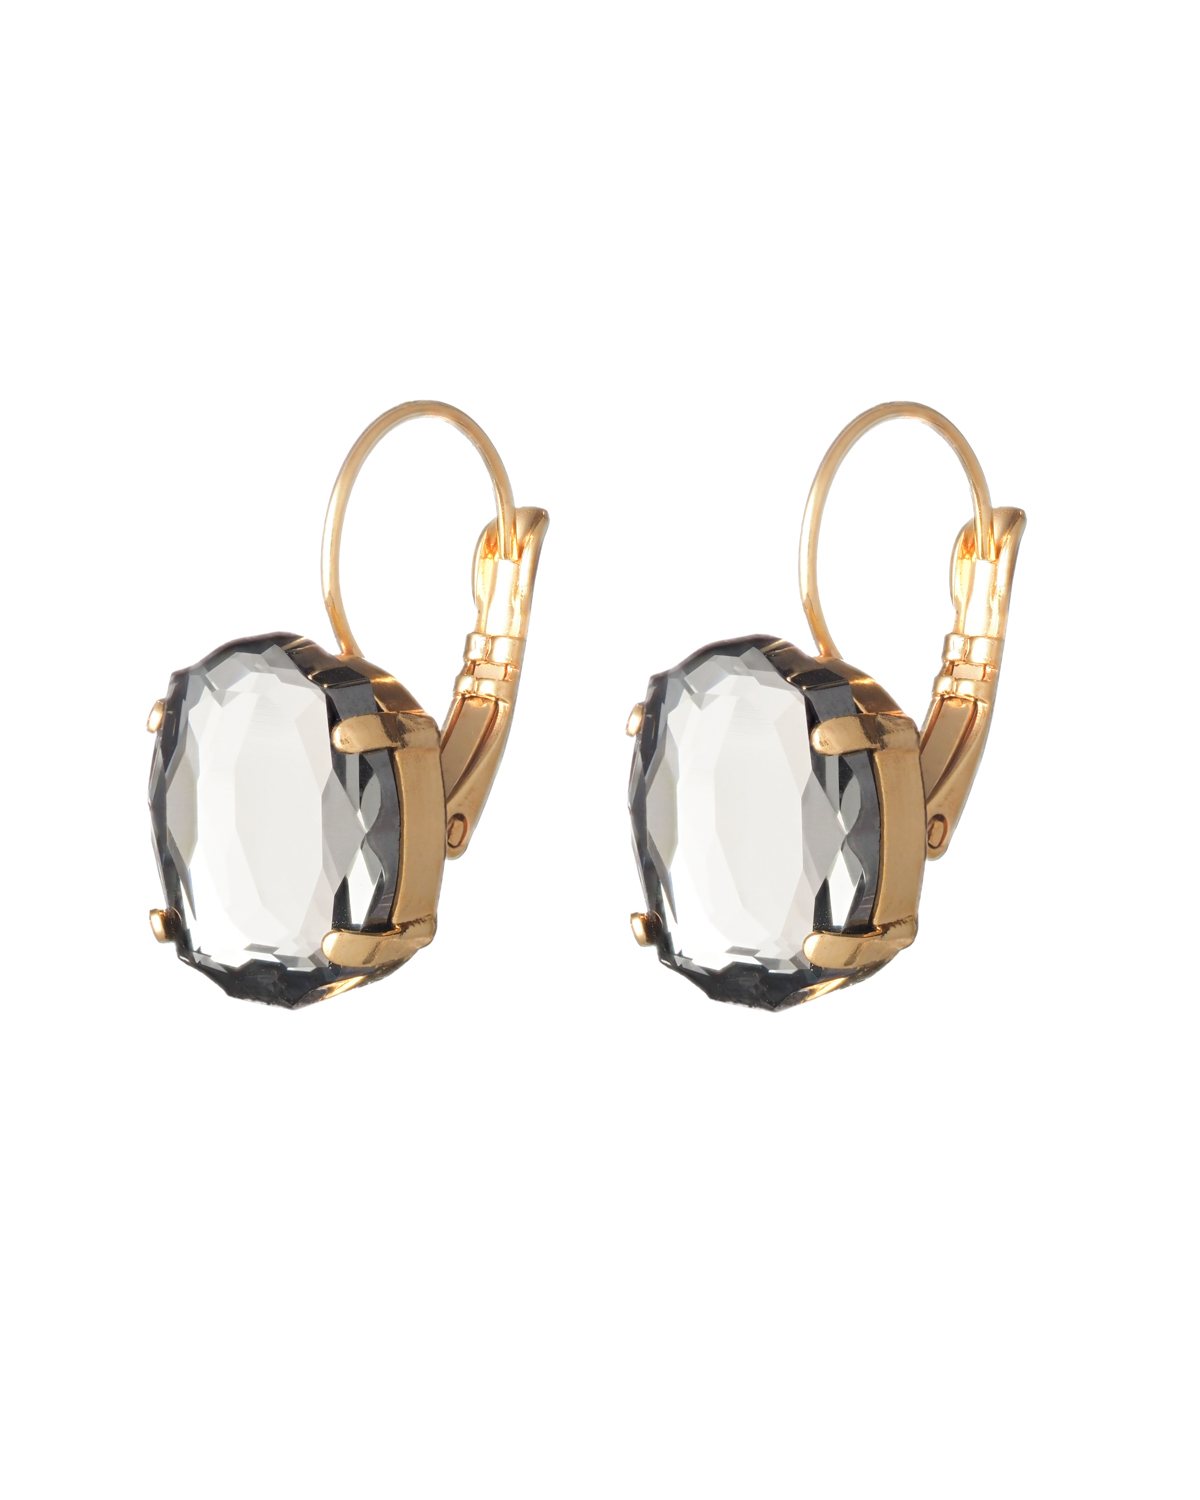 Crystal Silver Night Baroque Mirror Earrings - Gold plated Close